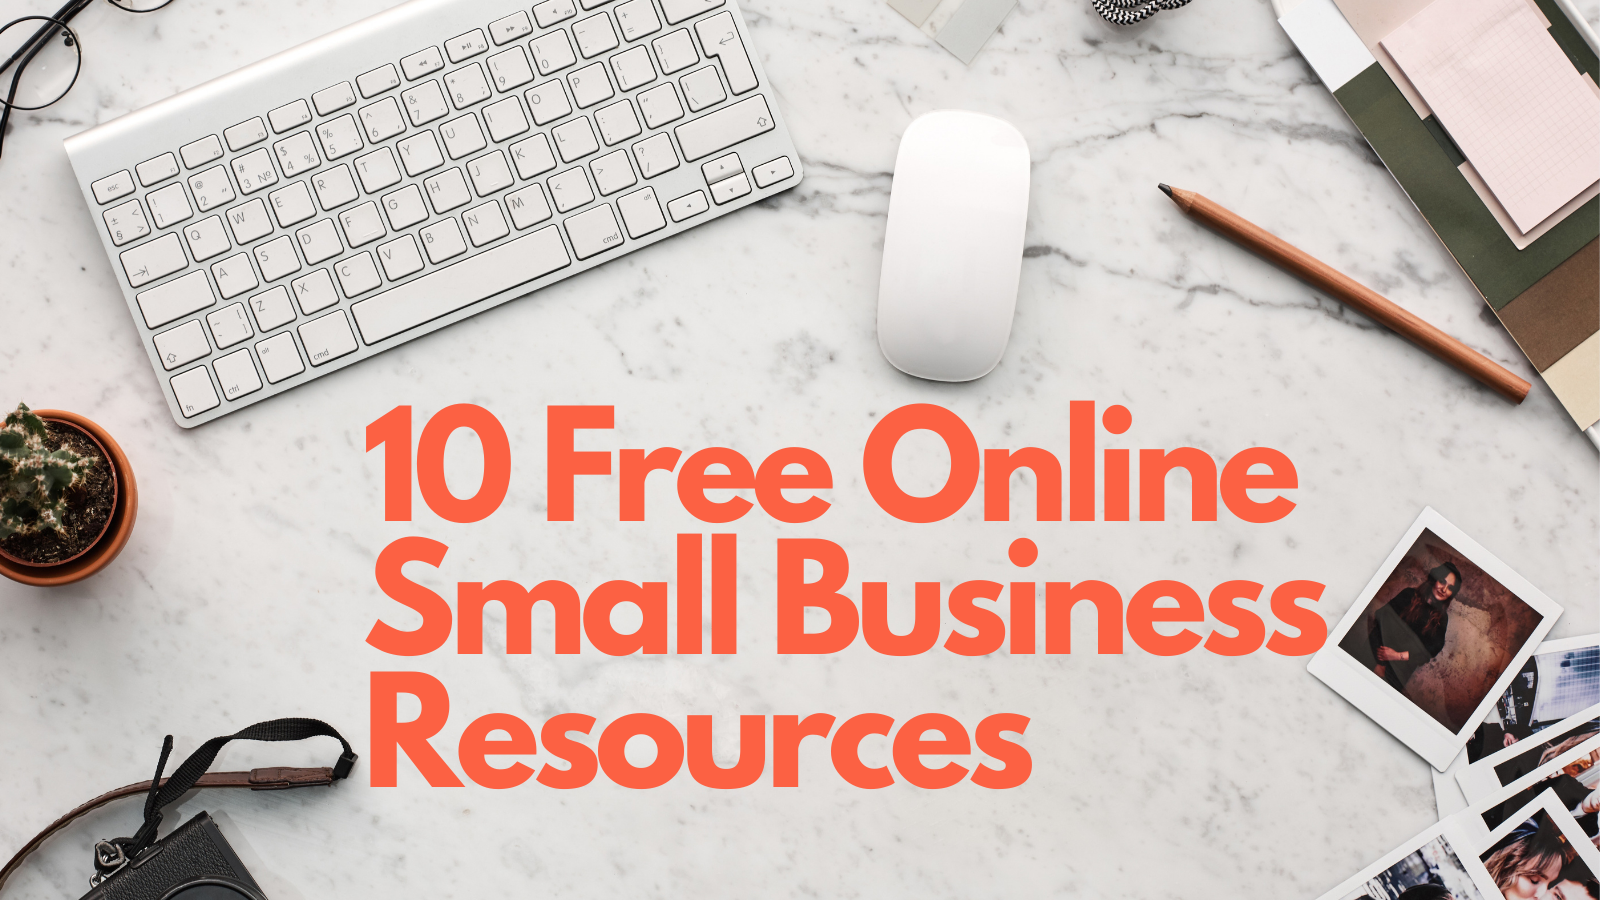 10 Free Online Small Business Resources